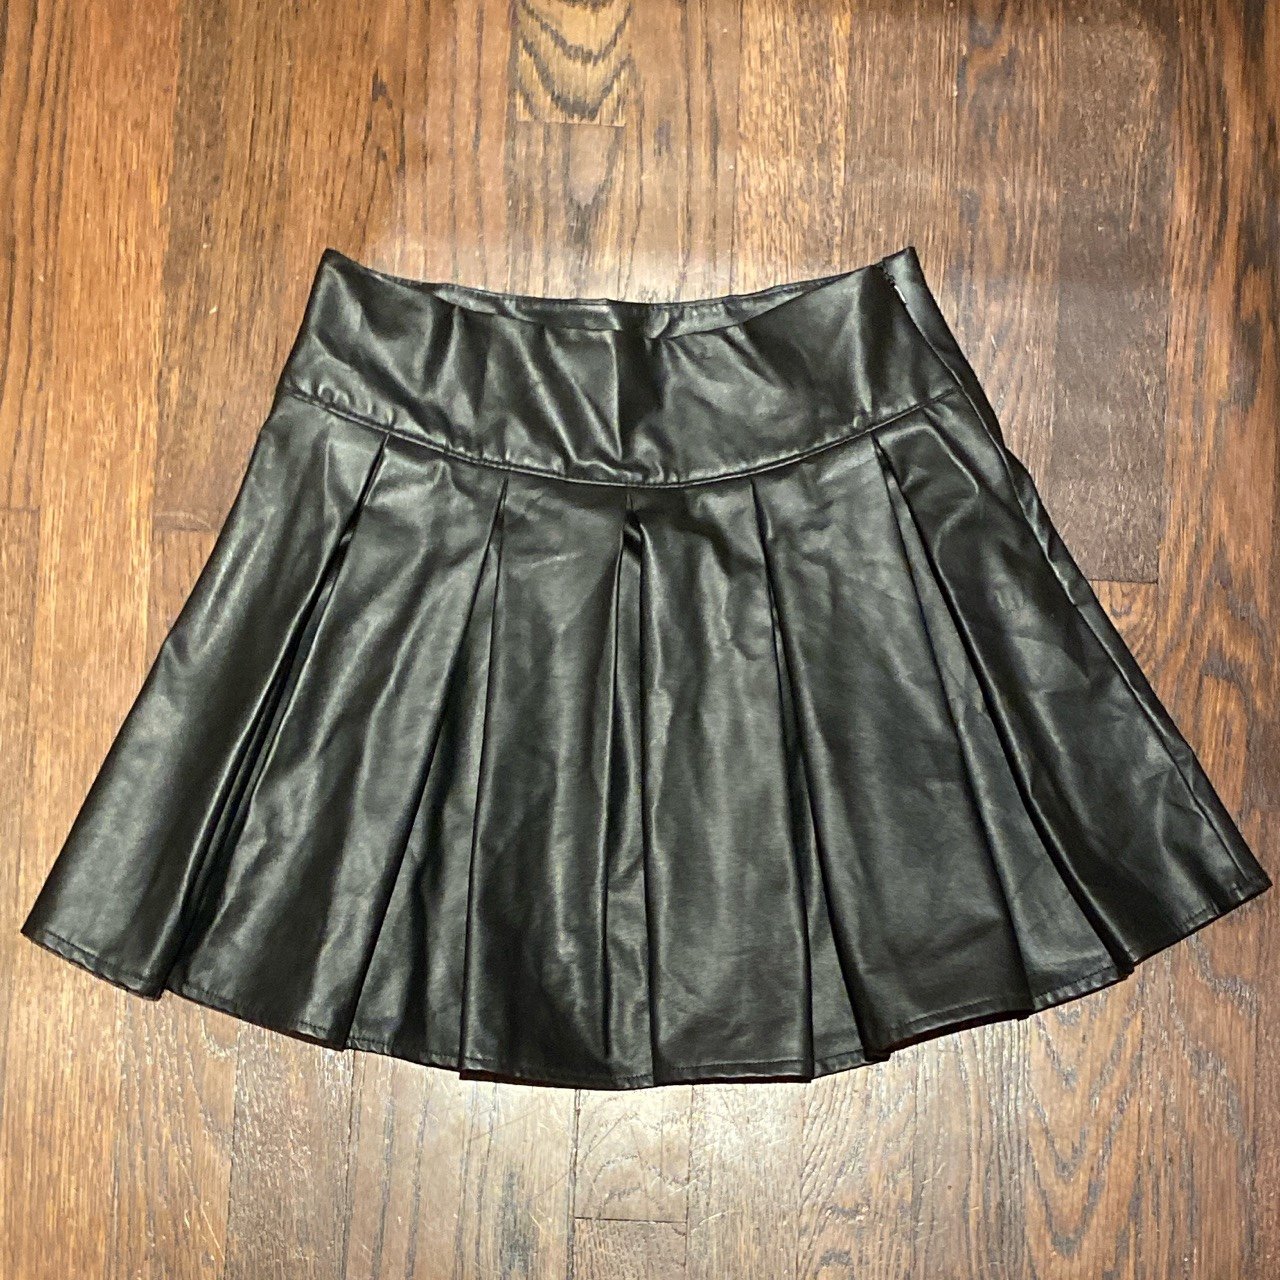 Promotions  NEW Hot Topic Skirt pEY4tfTdt well sale